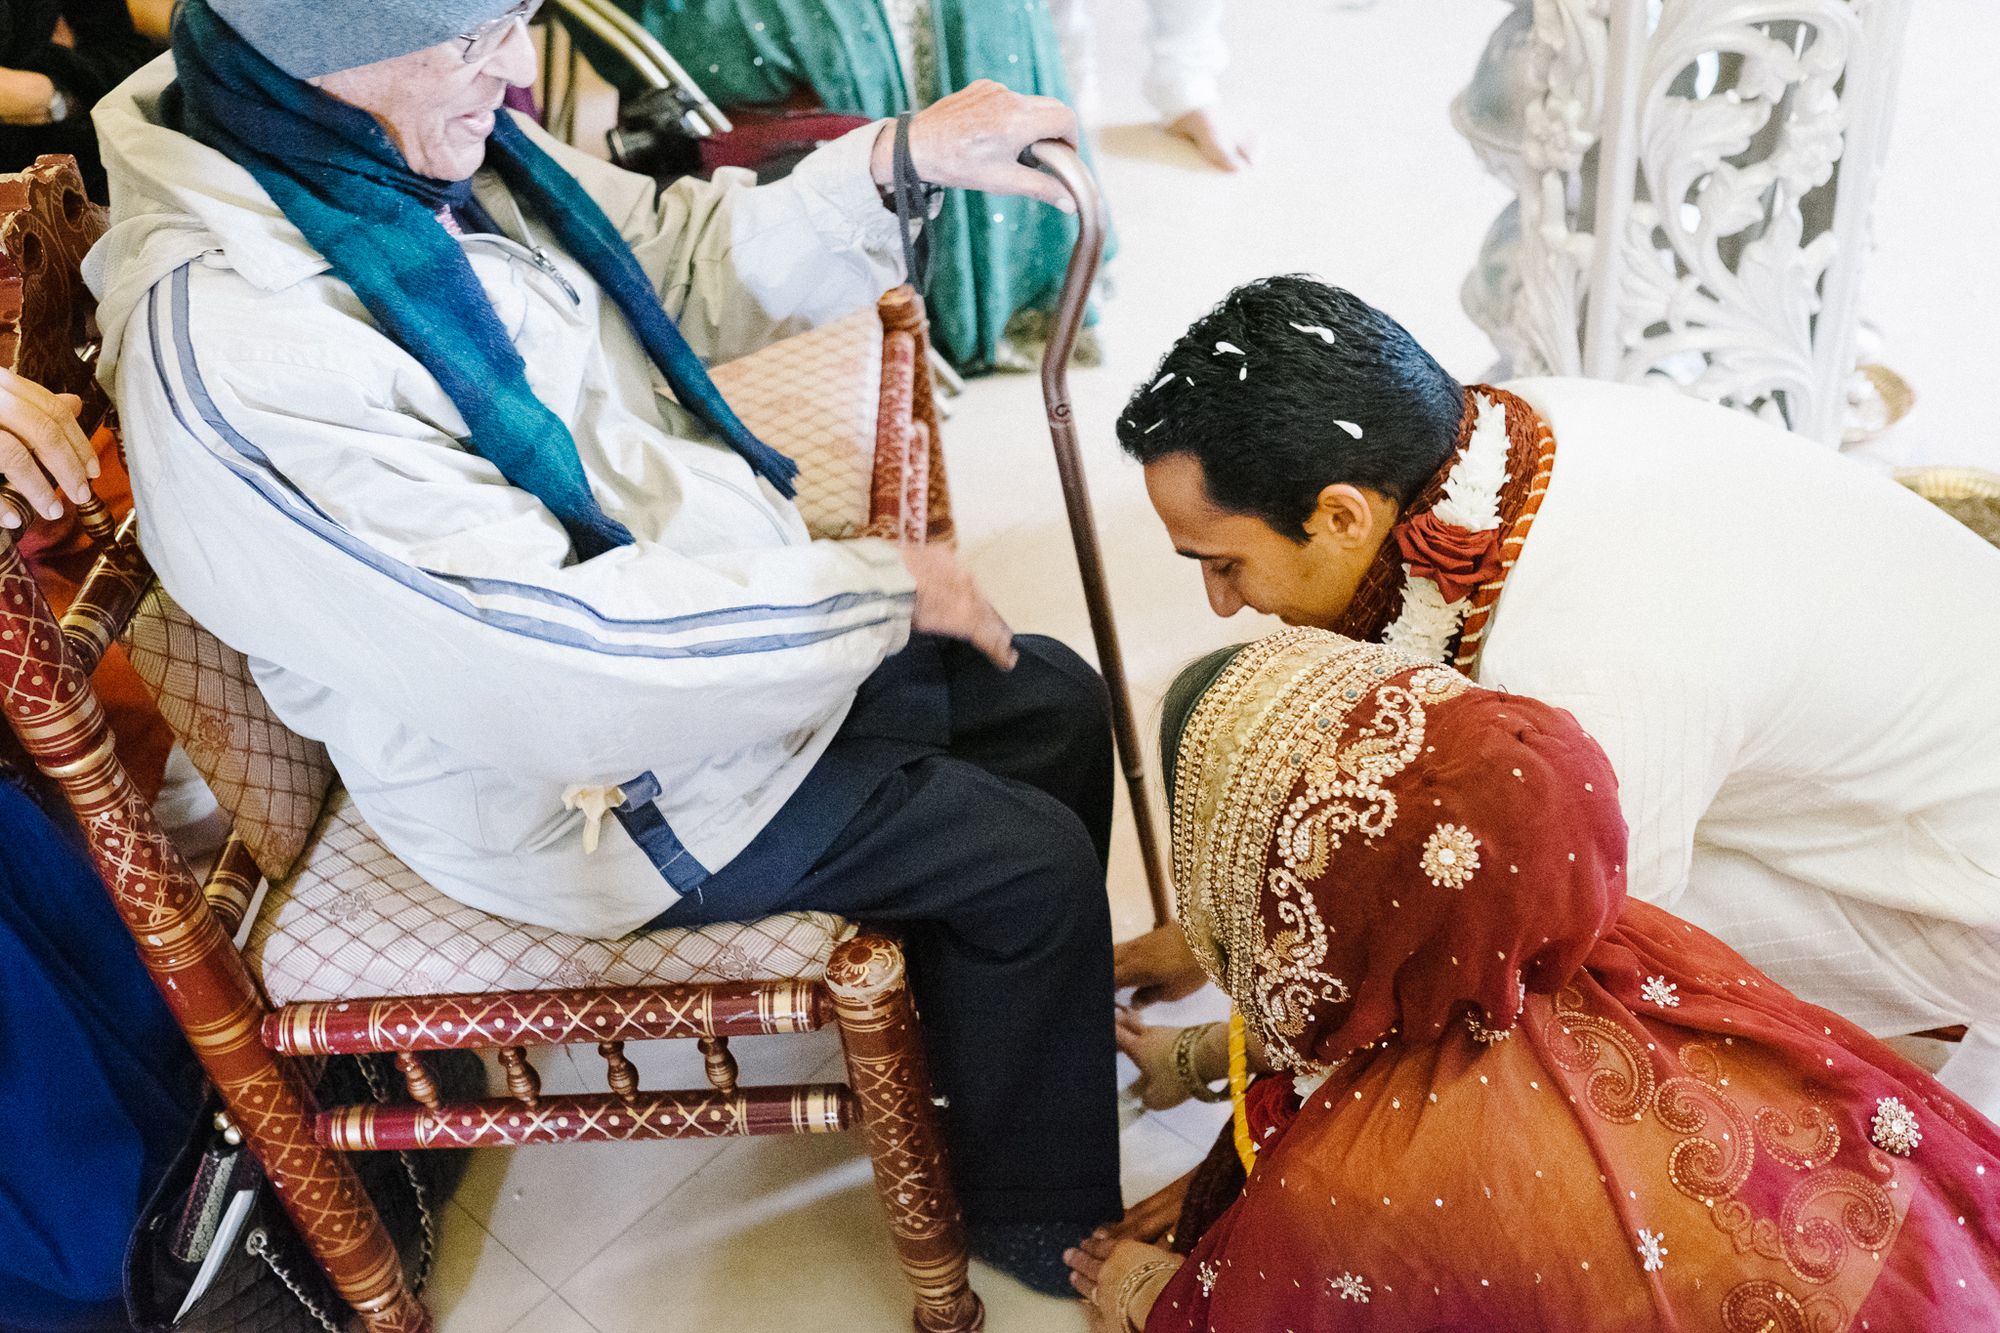 Grandparent blesses bride and groom at Hindu wedding ceremony